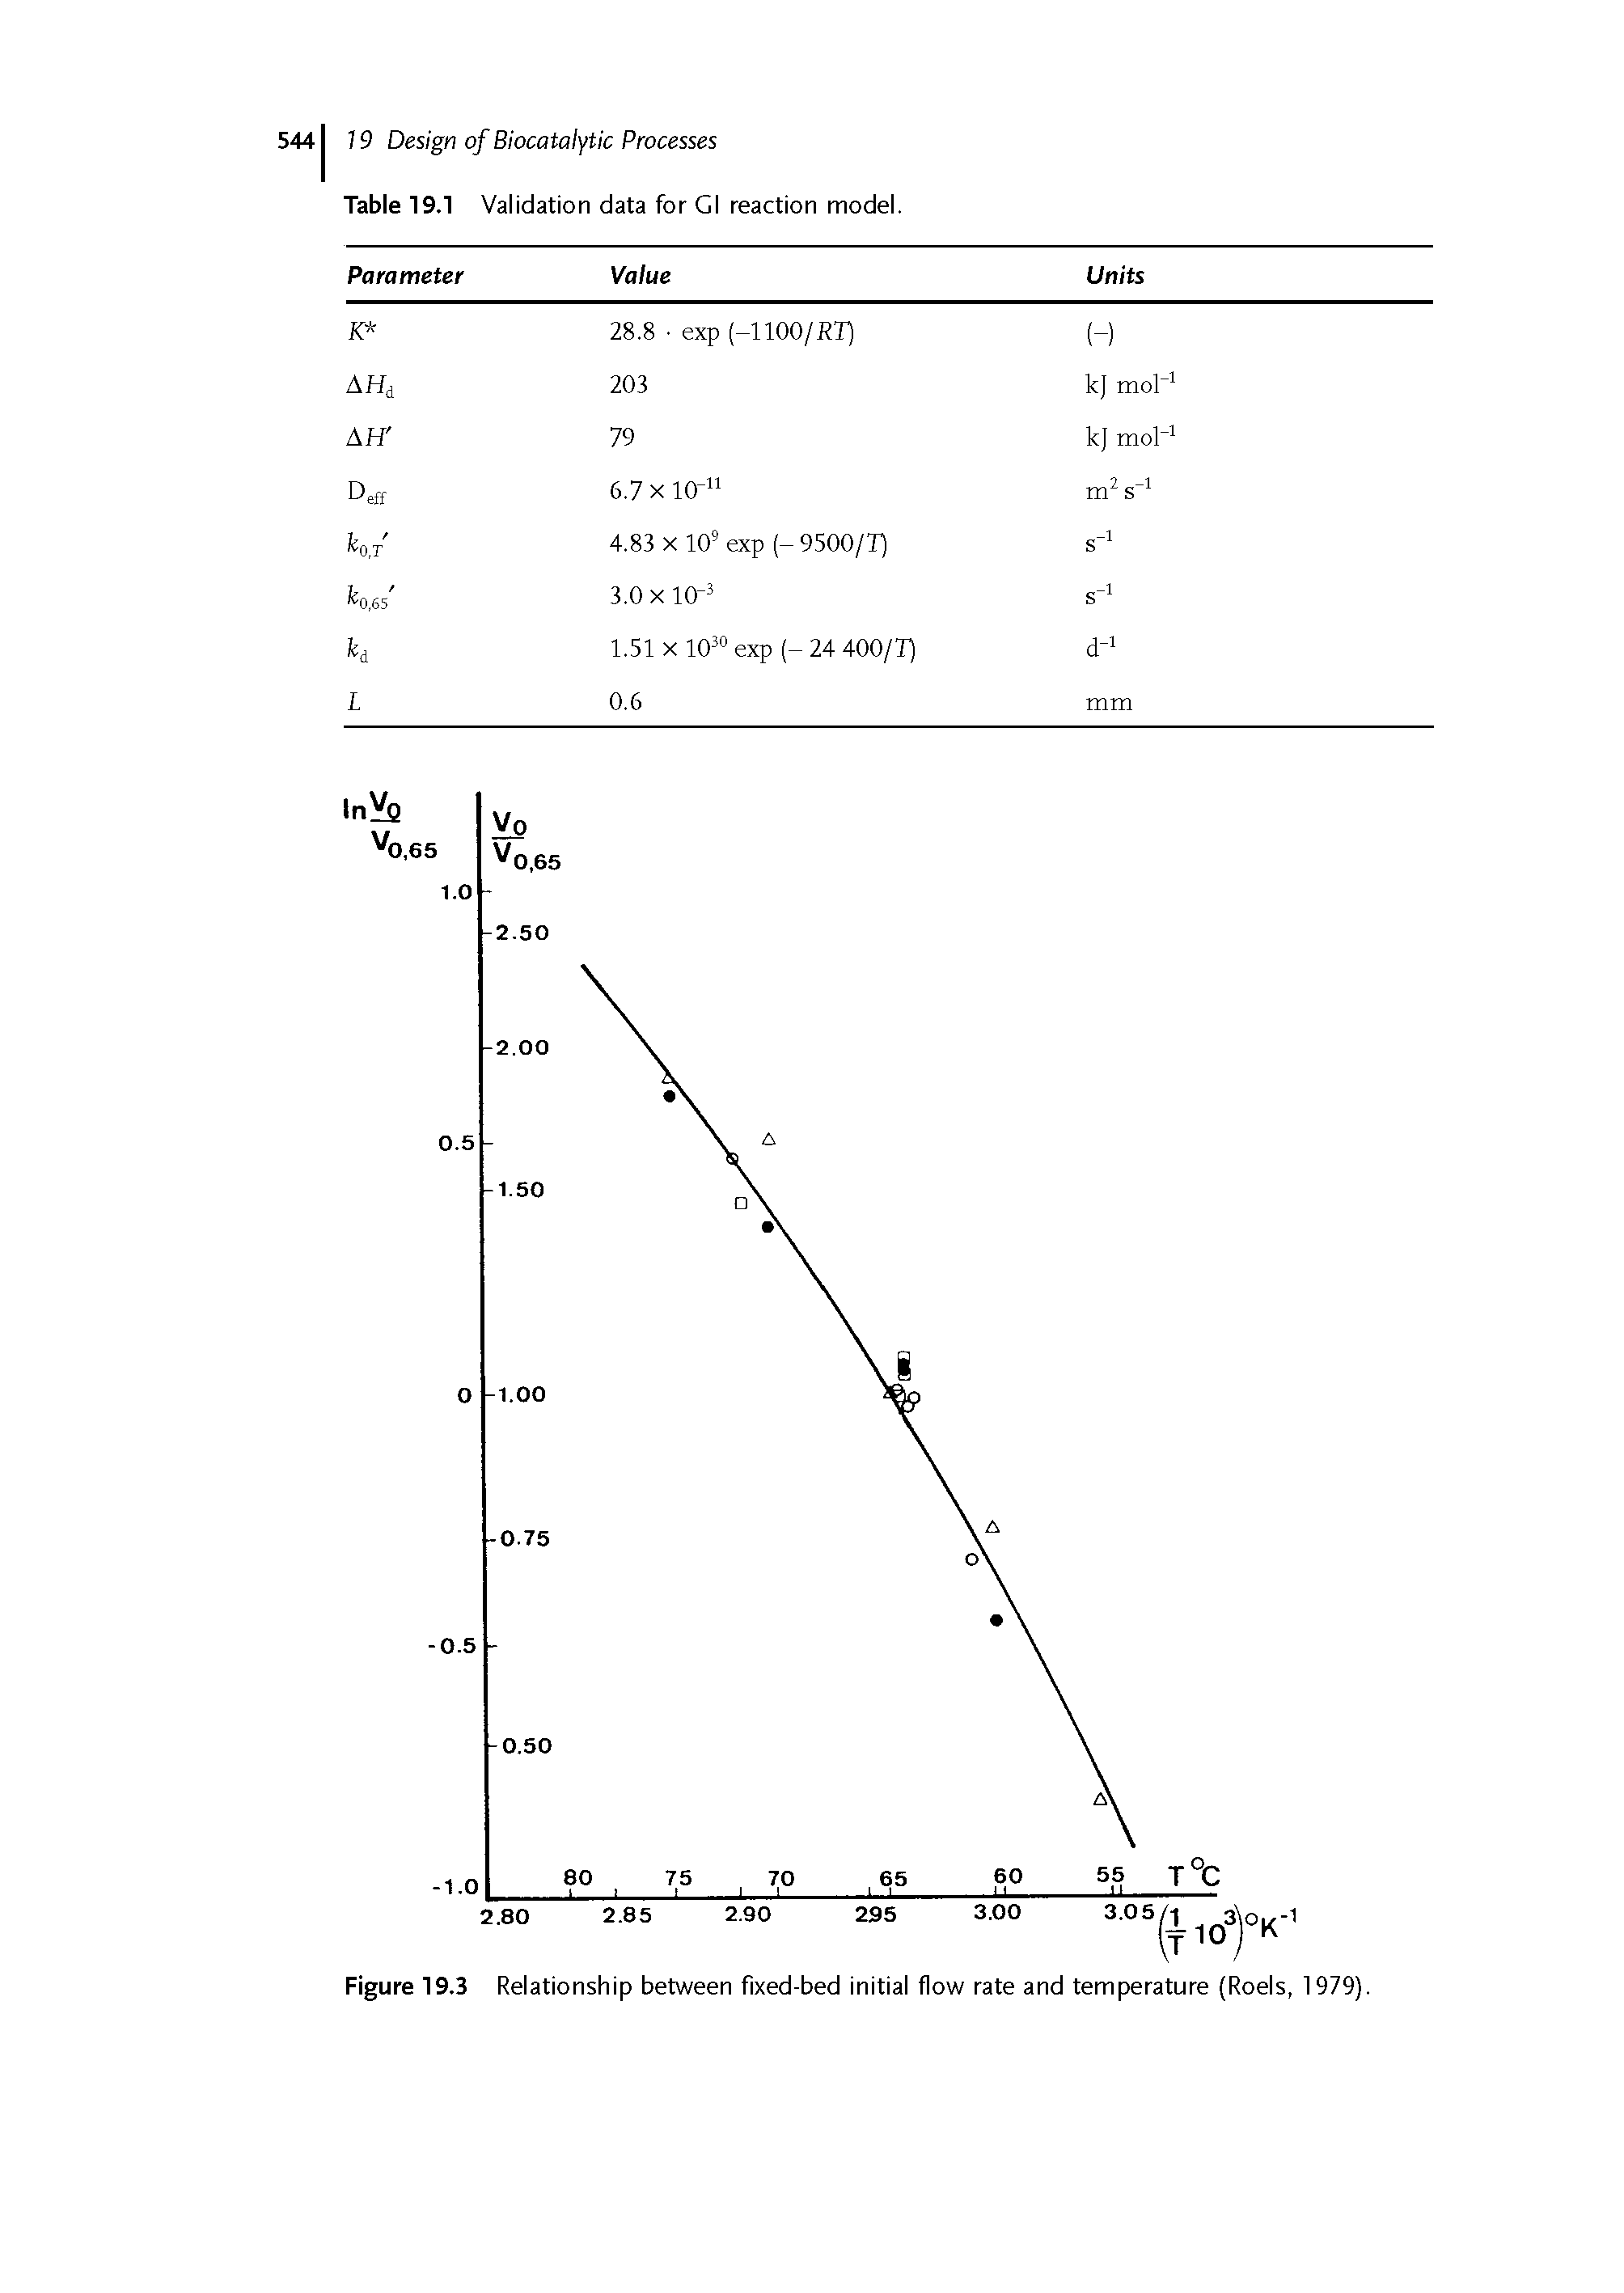 Figure 19.3 Relationship between fixed-bed initial flow rate and temperature (Roels, 1979).